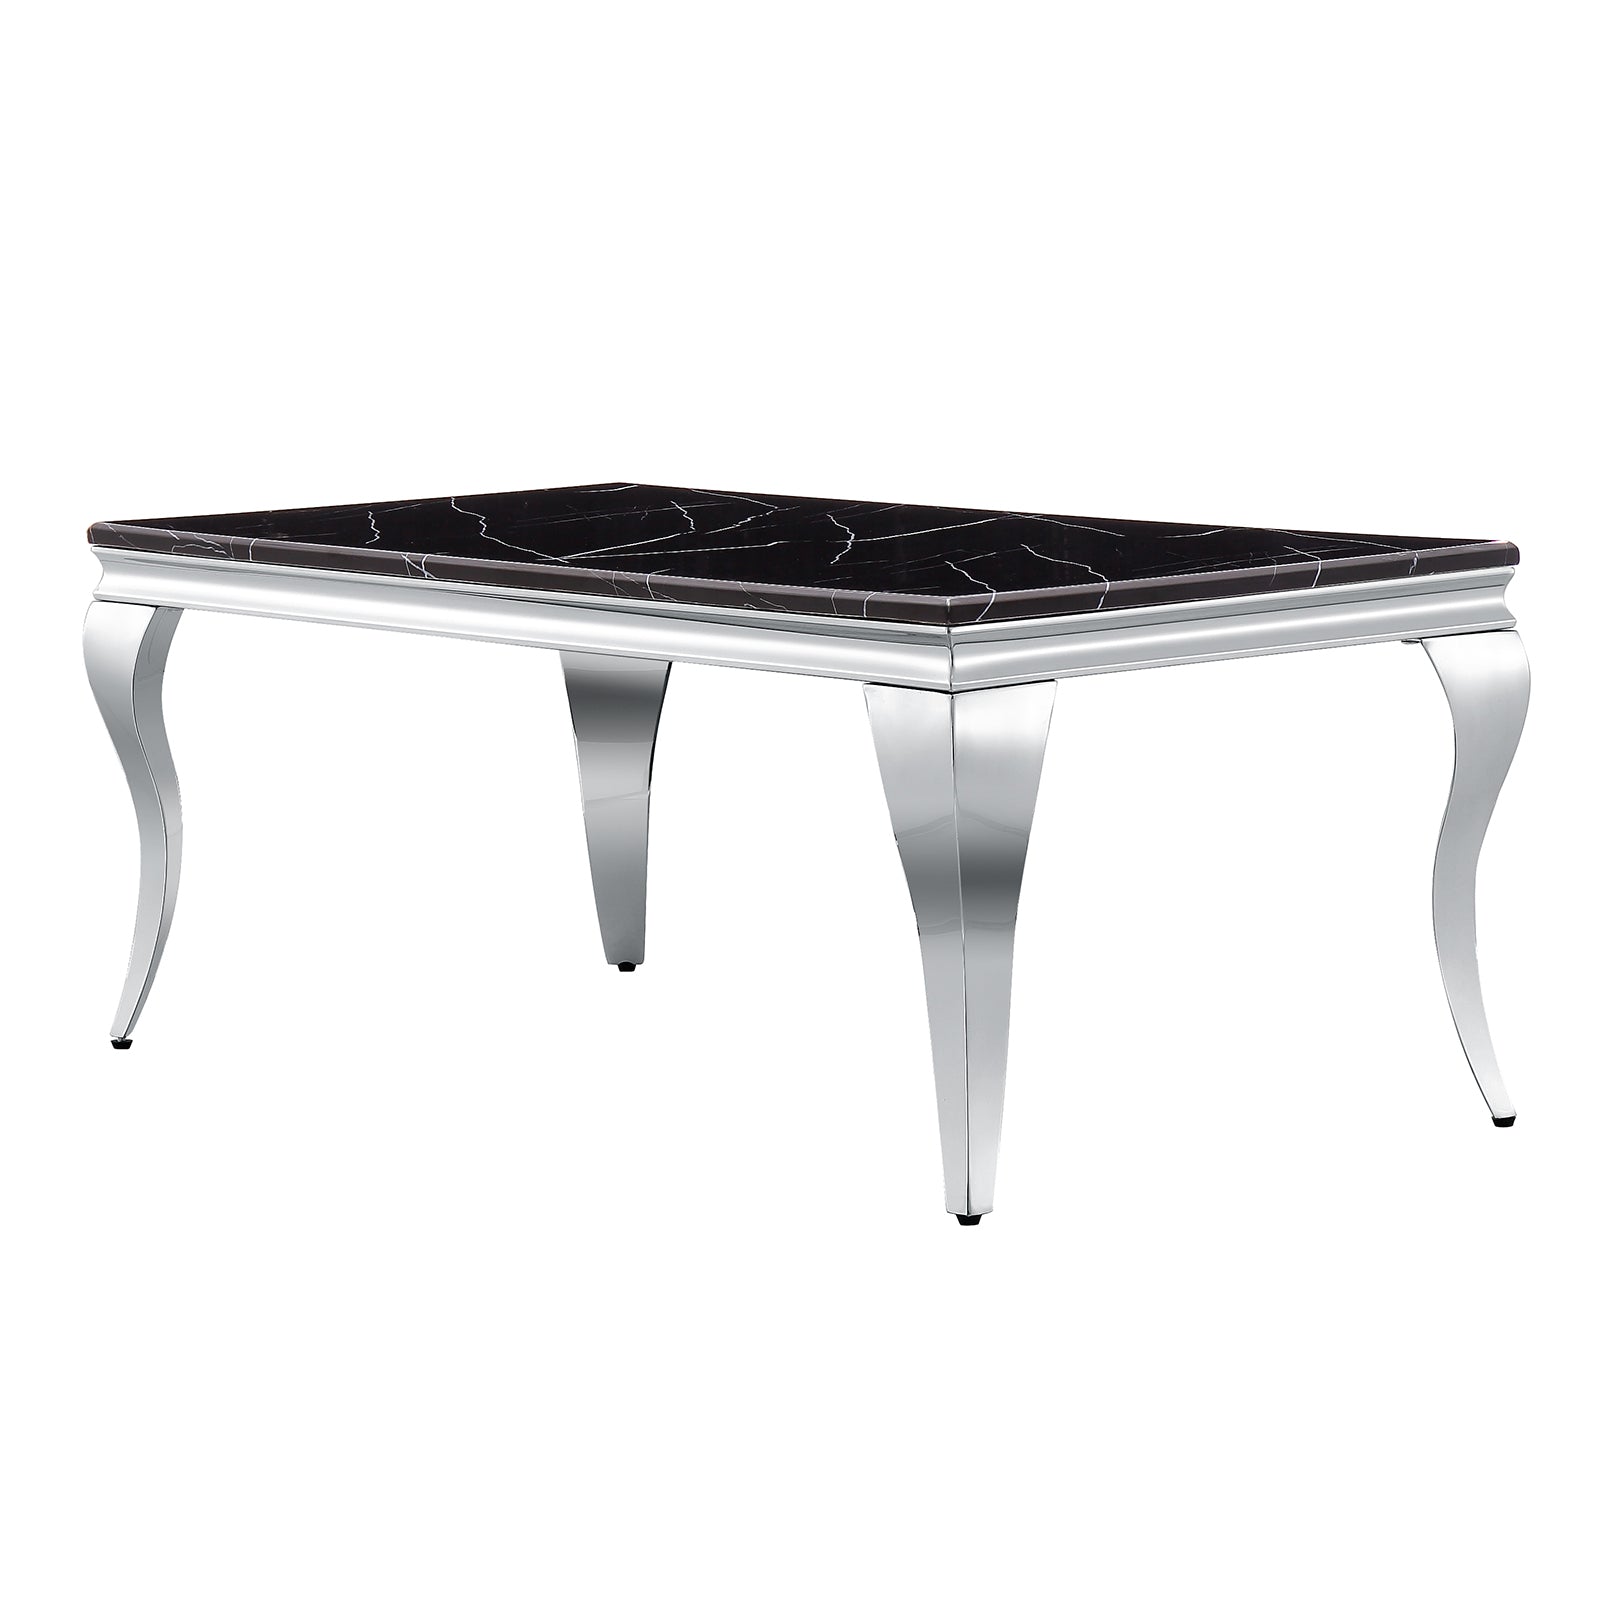 The Modern Elegance of a Black Coffee Table: Benefits and Style